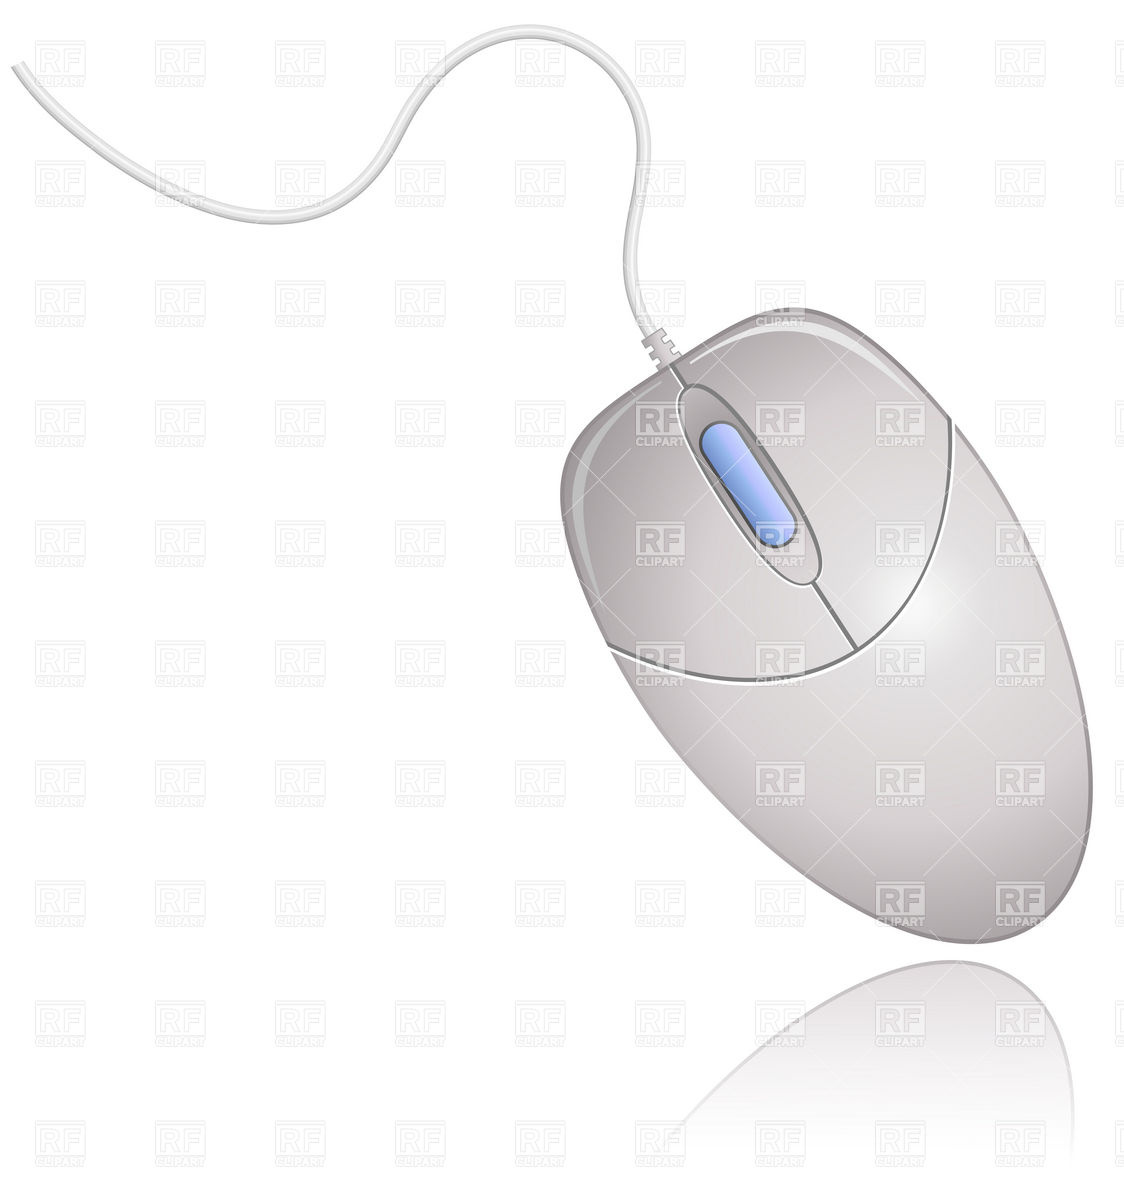 14 Computer Mouse Vector Art Images